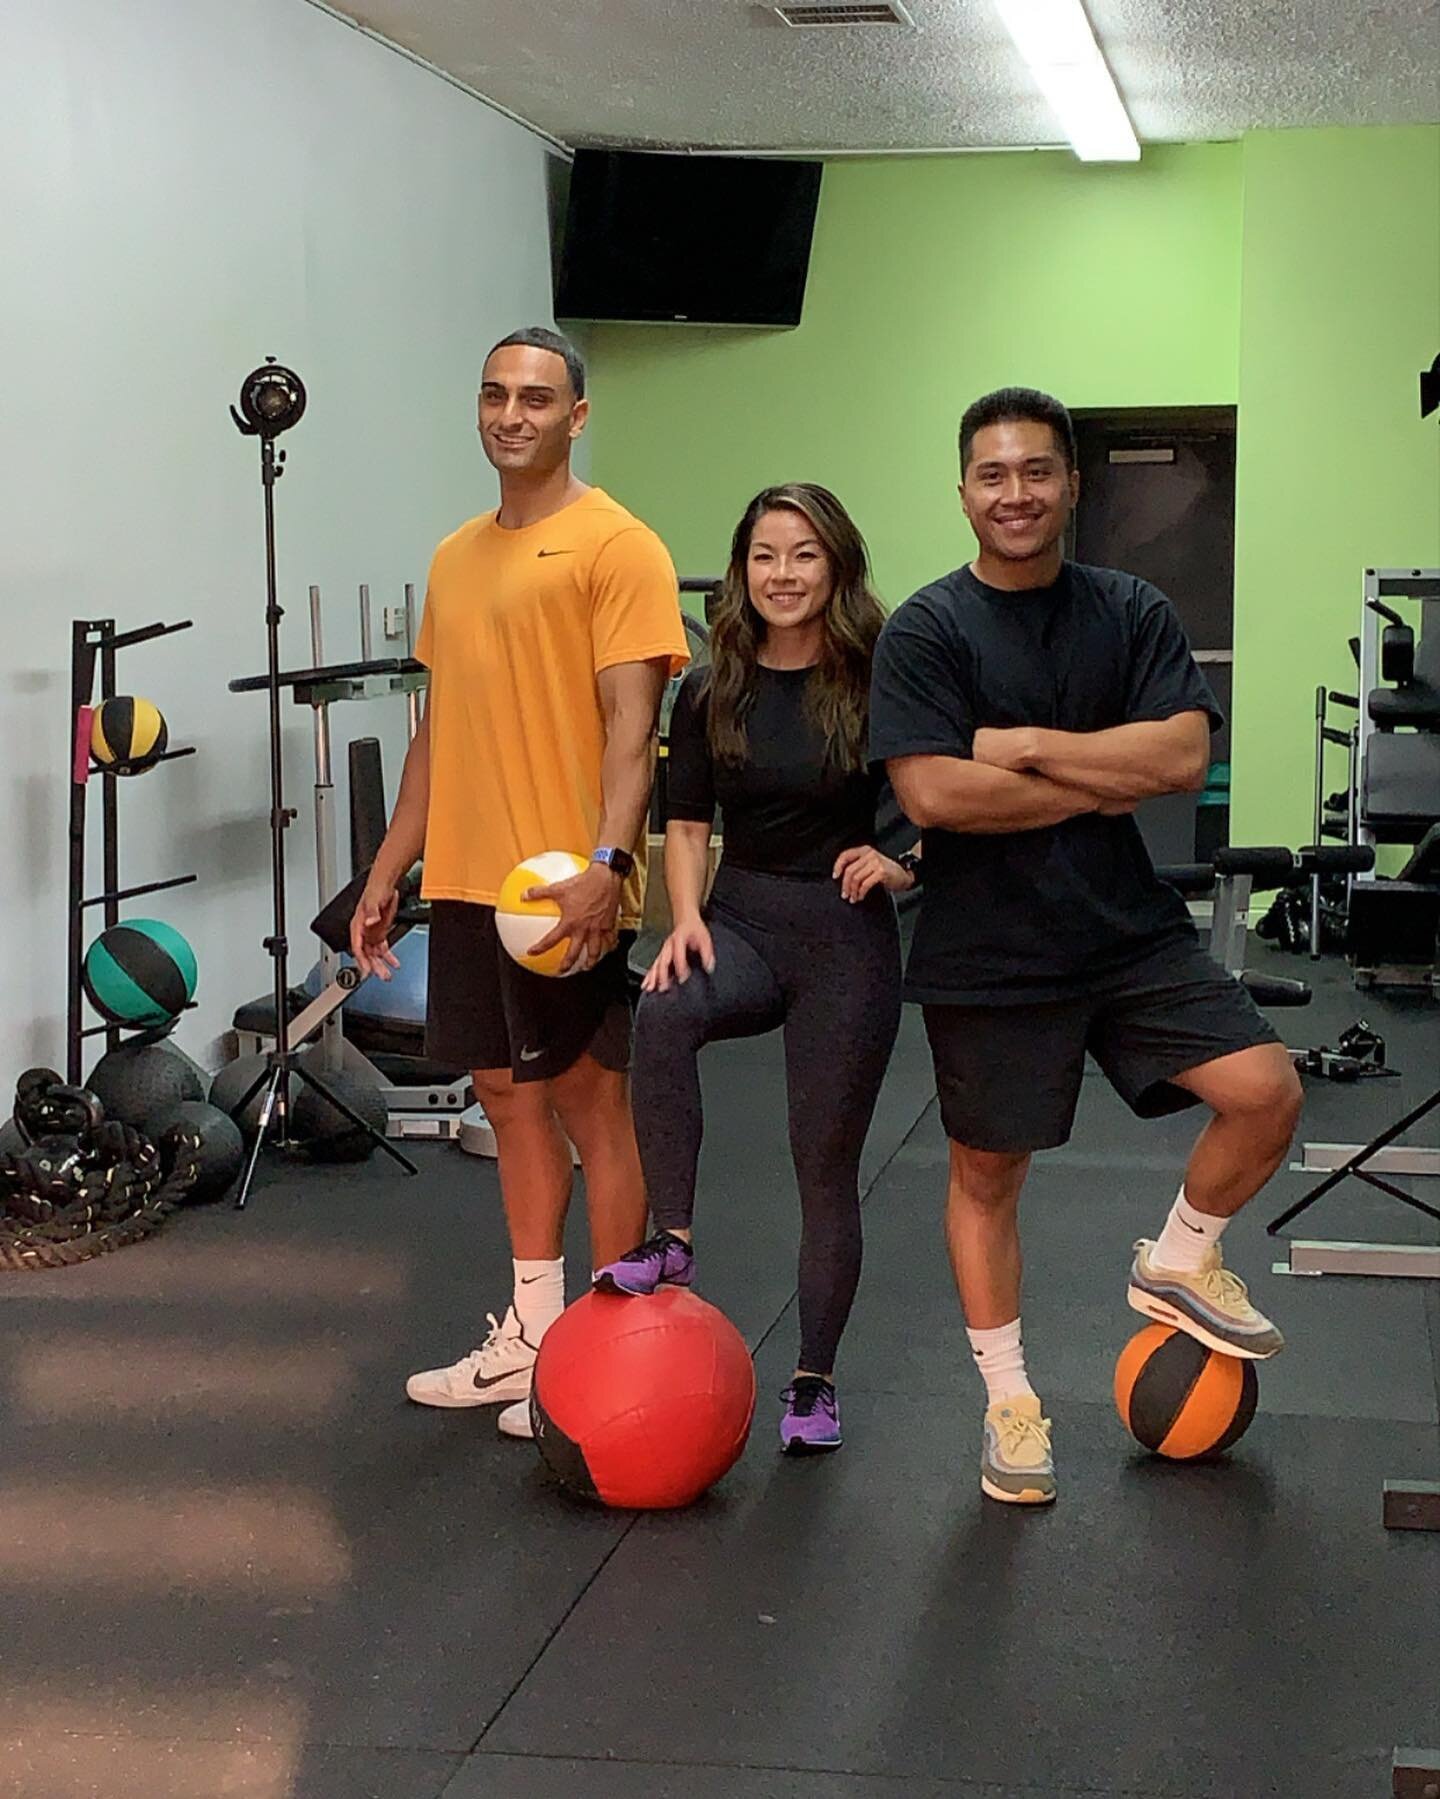 Just a little sneak peek, unedited pic from our photo shoot this past weekend feat. all our trainers 🤩
.
.
.
#rowlandheights #puentehills #fit #fitness #fitlife #fitnessjourney #fitnessgoals #healthy #health #healthylifestyle #healthyliving #workout